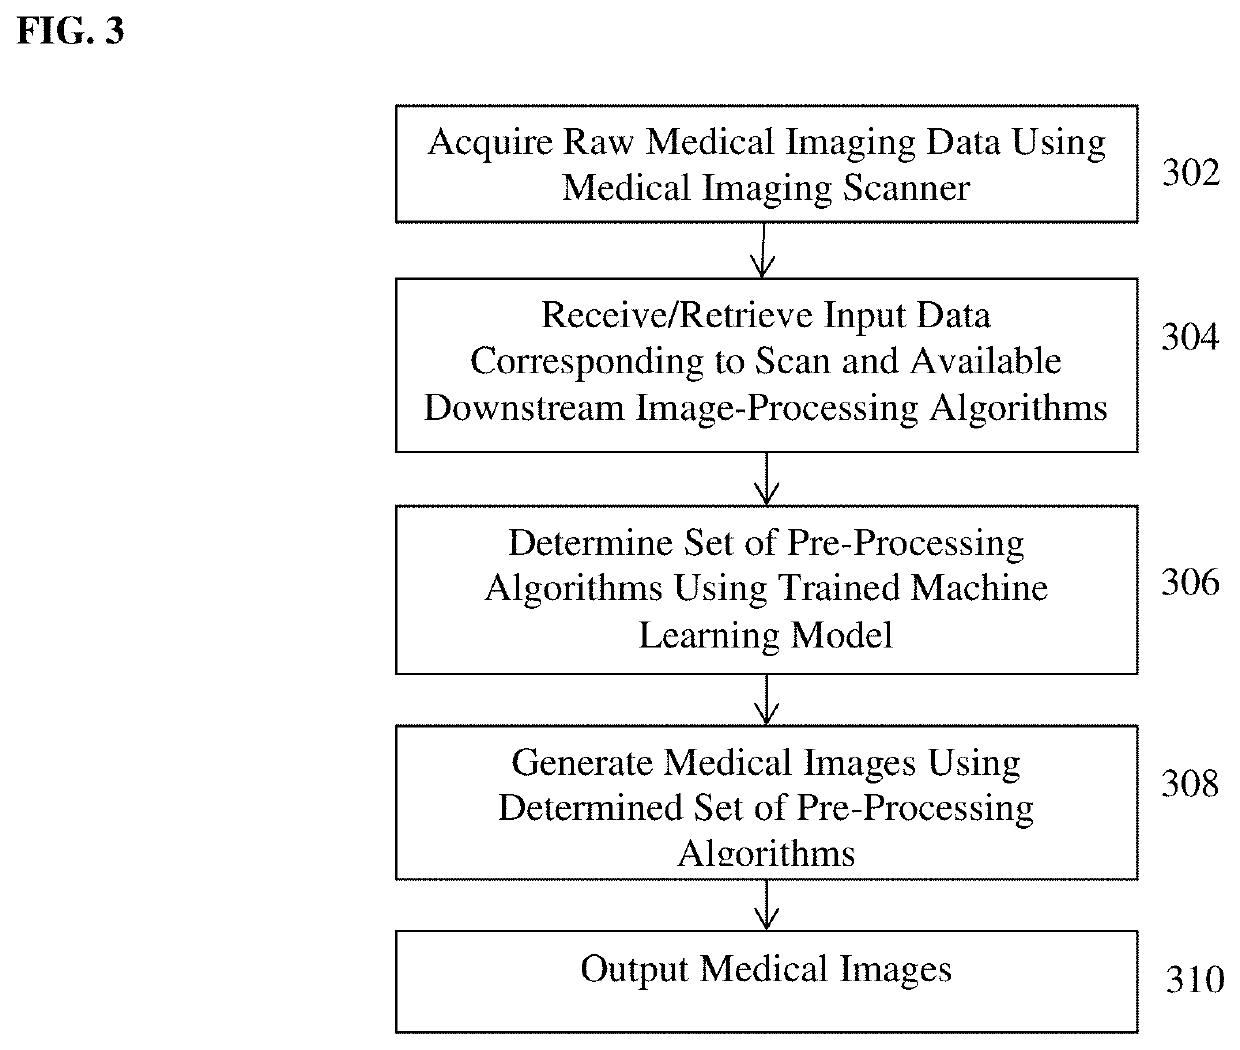 Medical Image Pre-Processing at the Scanner for Facilitating Joint Interpretation by Radiologists and Artificial Intelligence Algorithms